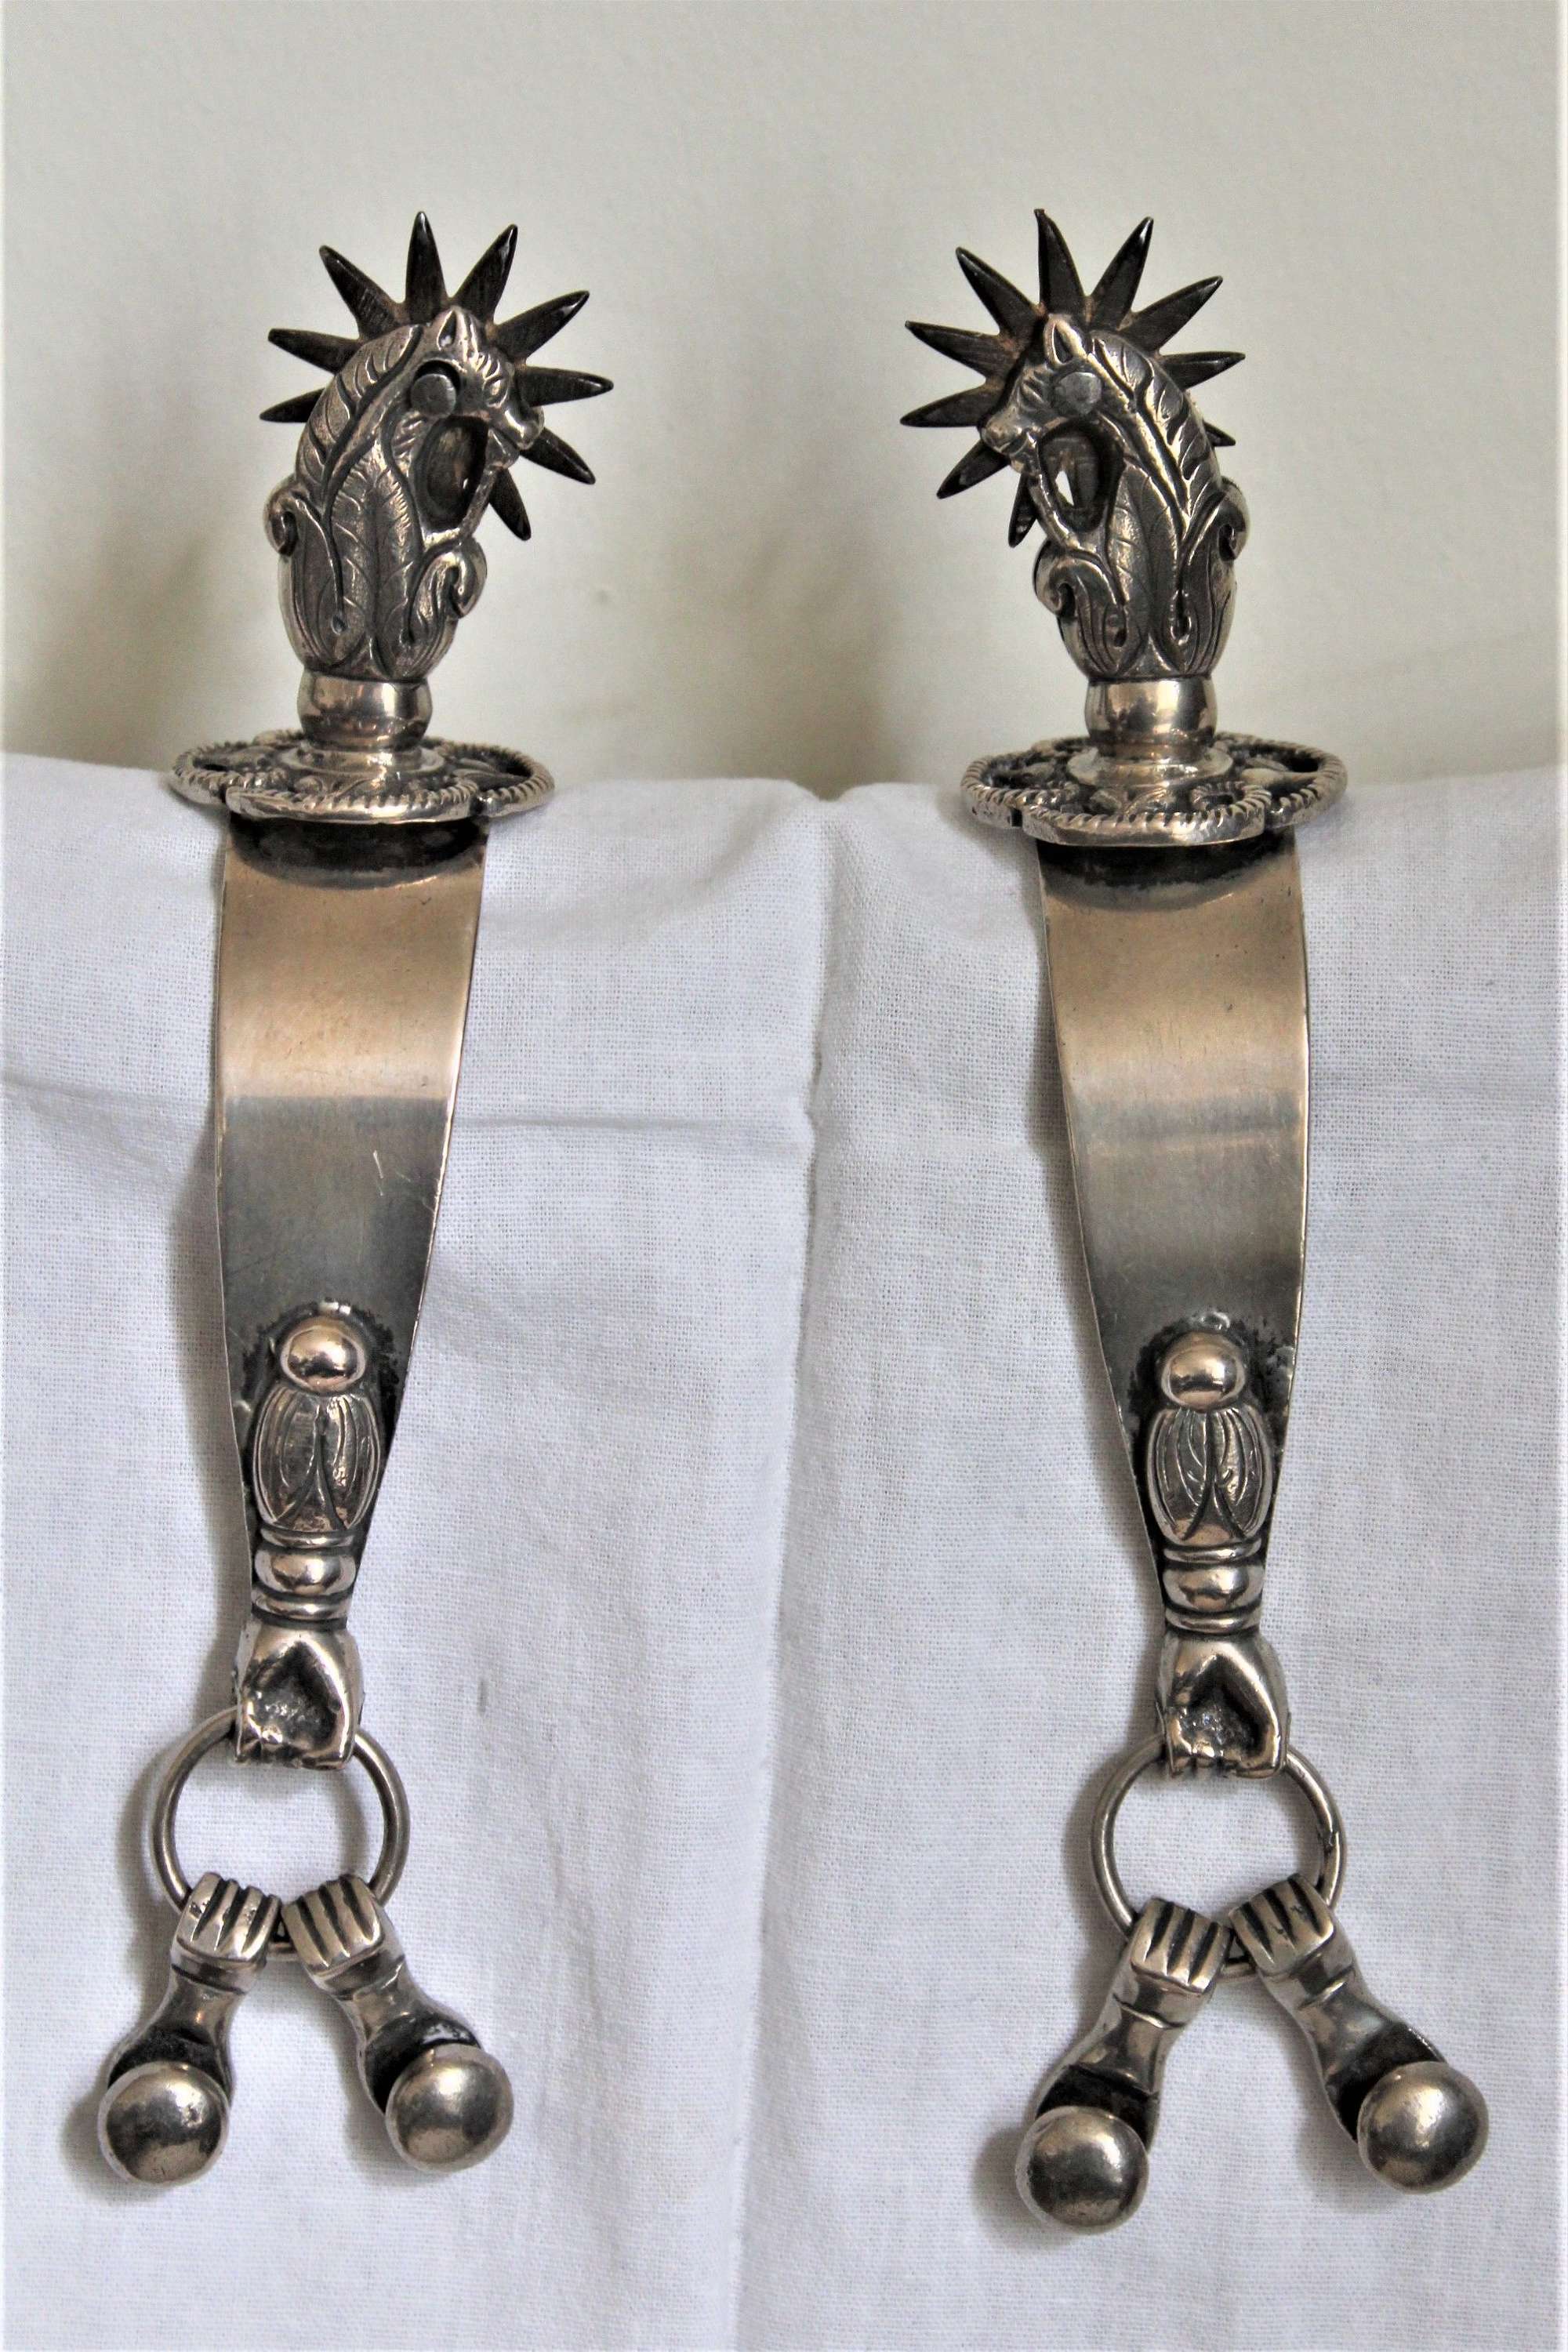 A Pair Of Decorative Hand Made South American Spurs